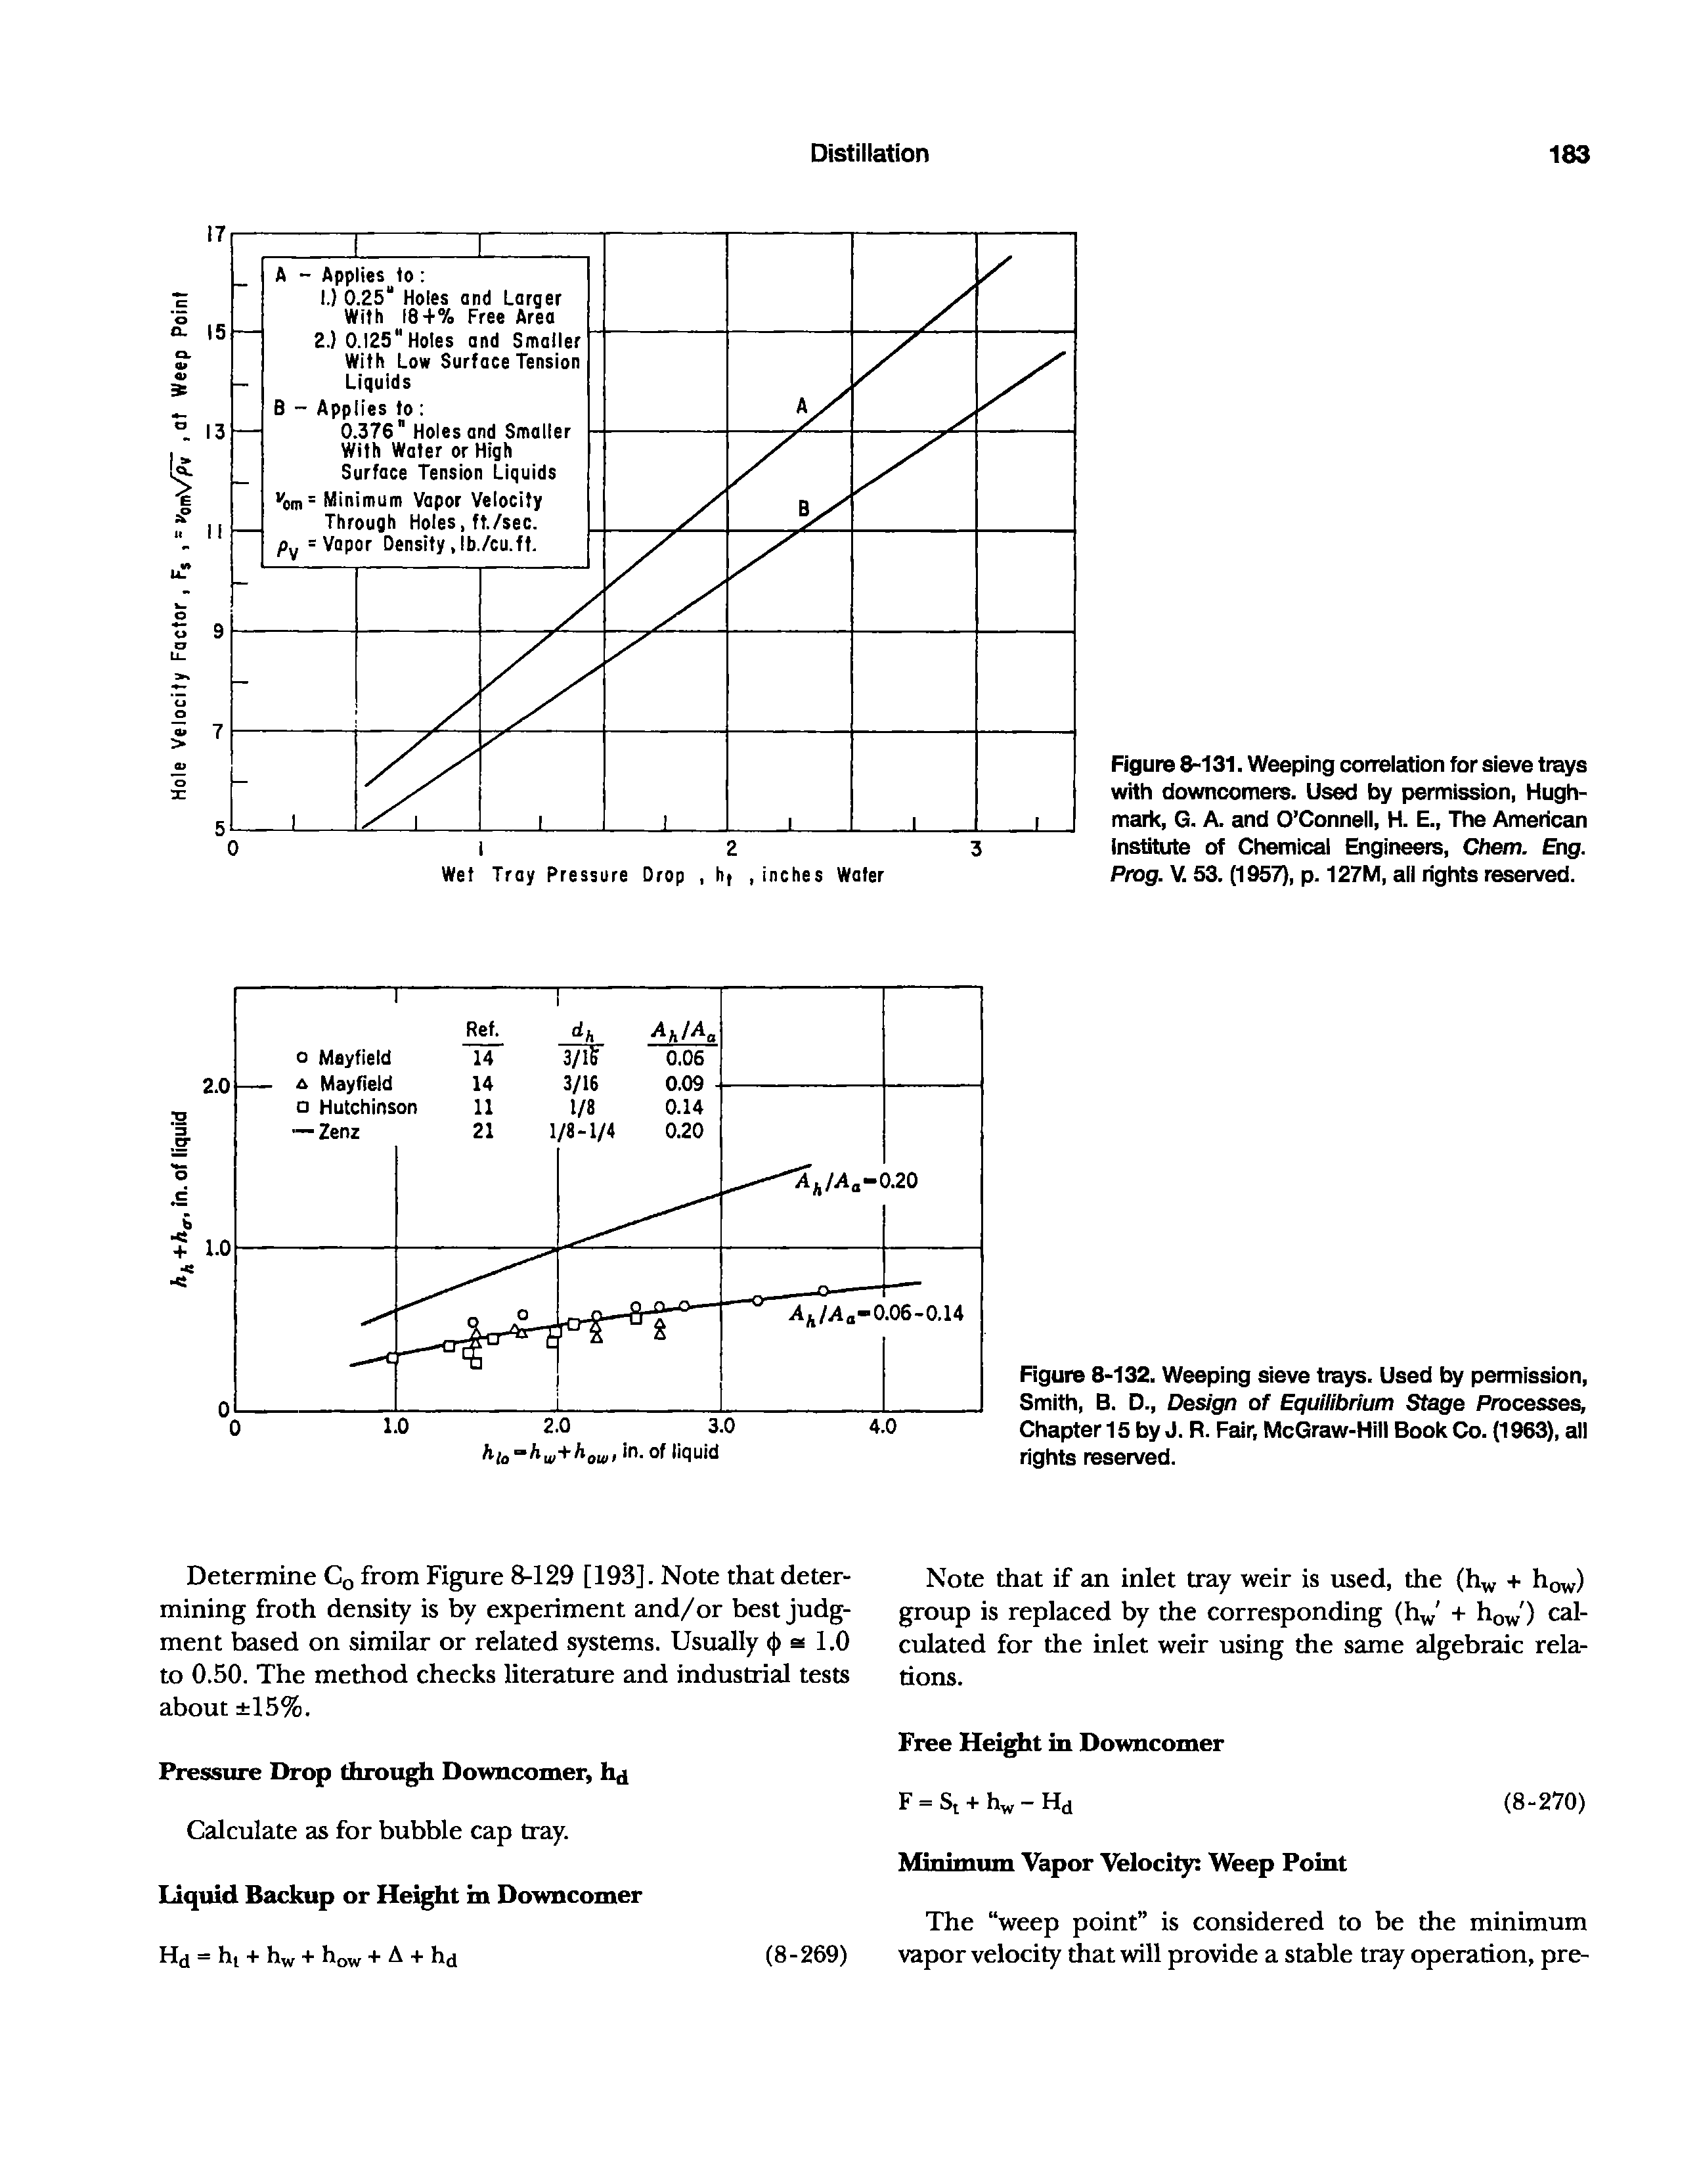 Figure 8-131. Weeping correiation for sieve trays with downcomers. Used by permission, Hugh-mark, G. A. and O Conneli, H. E., The American Institute of Chemical Engirteers, Chem. Eng. Prog. V. 53. (1957), p. 127M, all rights reserved.